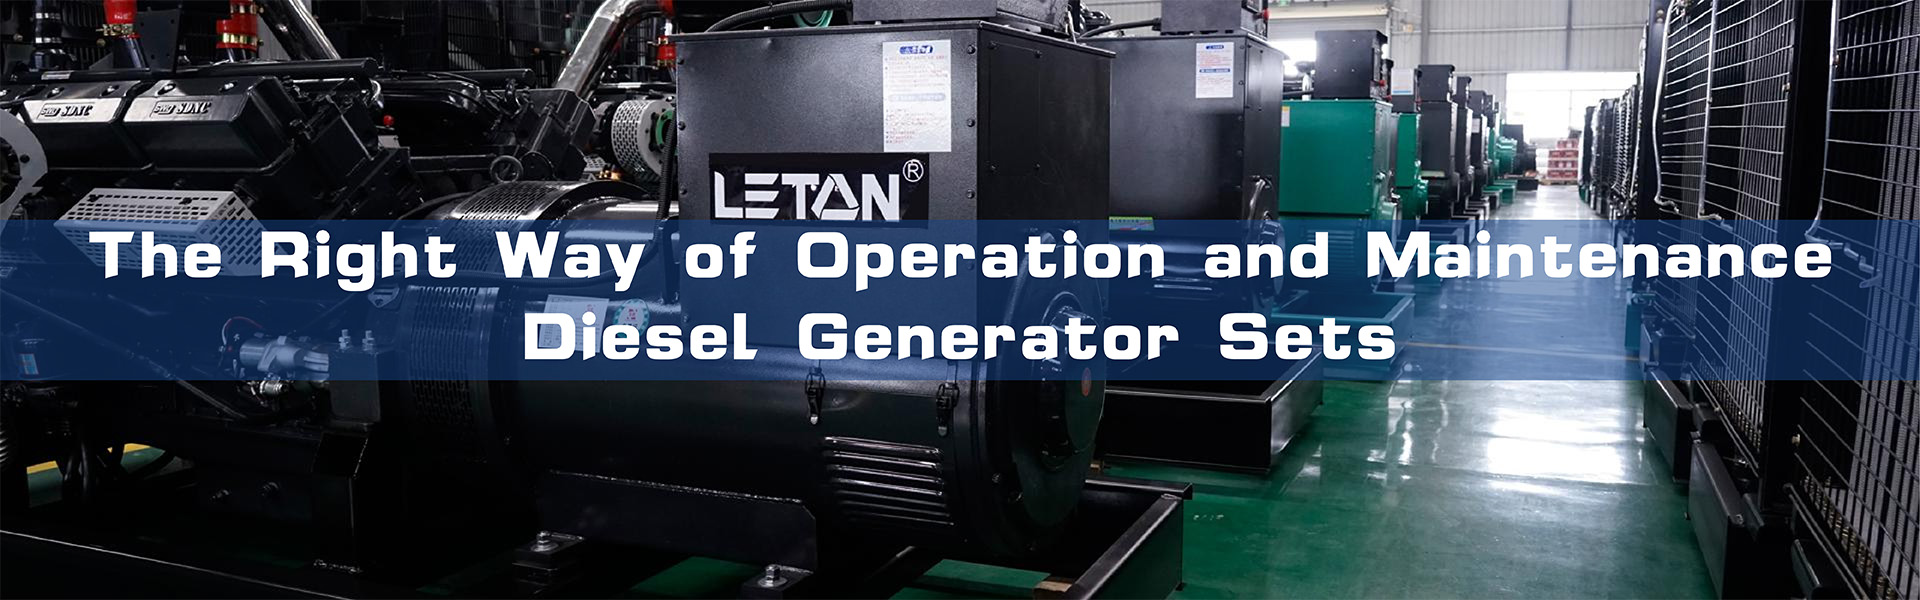 The Right Way of Operation and Maintenance of Diesel Generator Sets